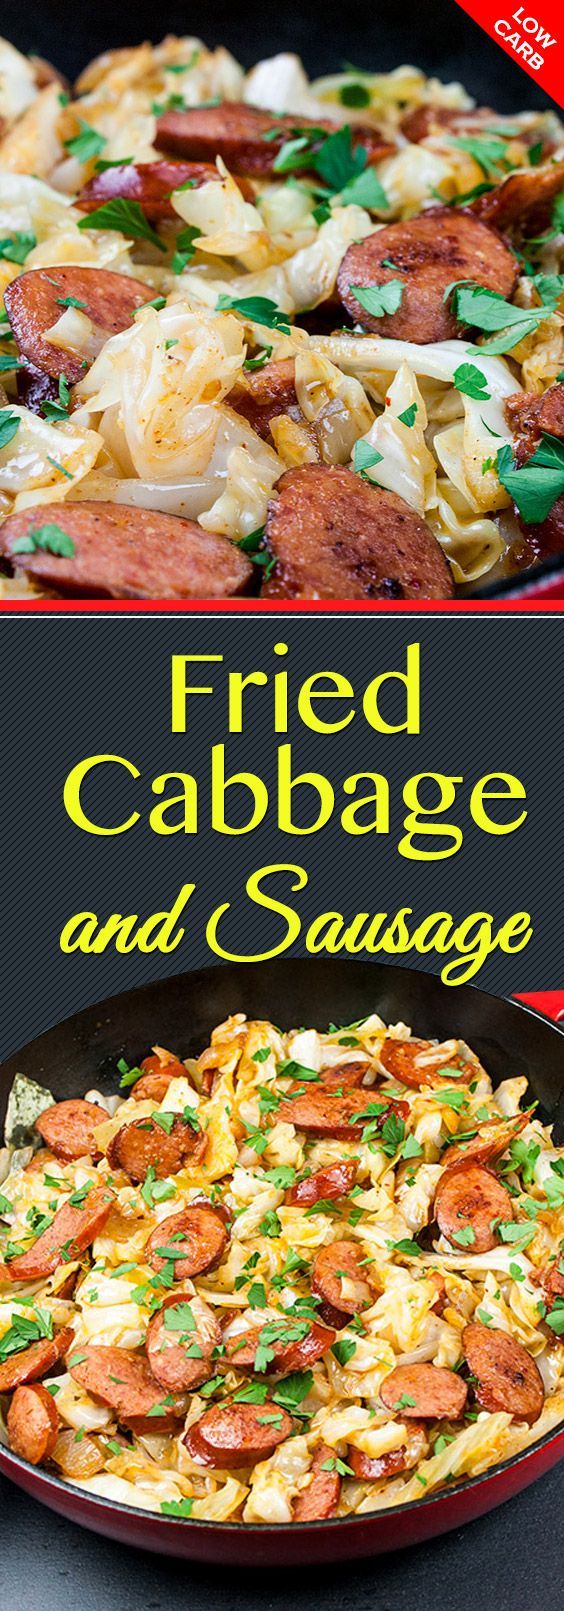 Fried Cabbage and Sausage -   23 sausage recipes cabbage
 ideas